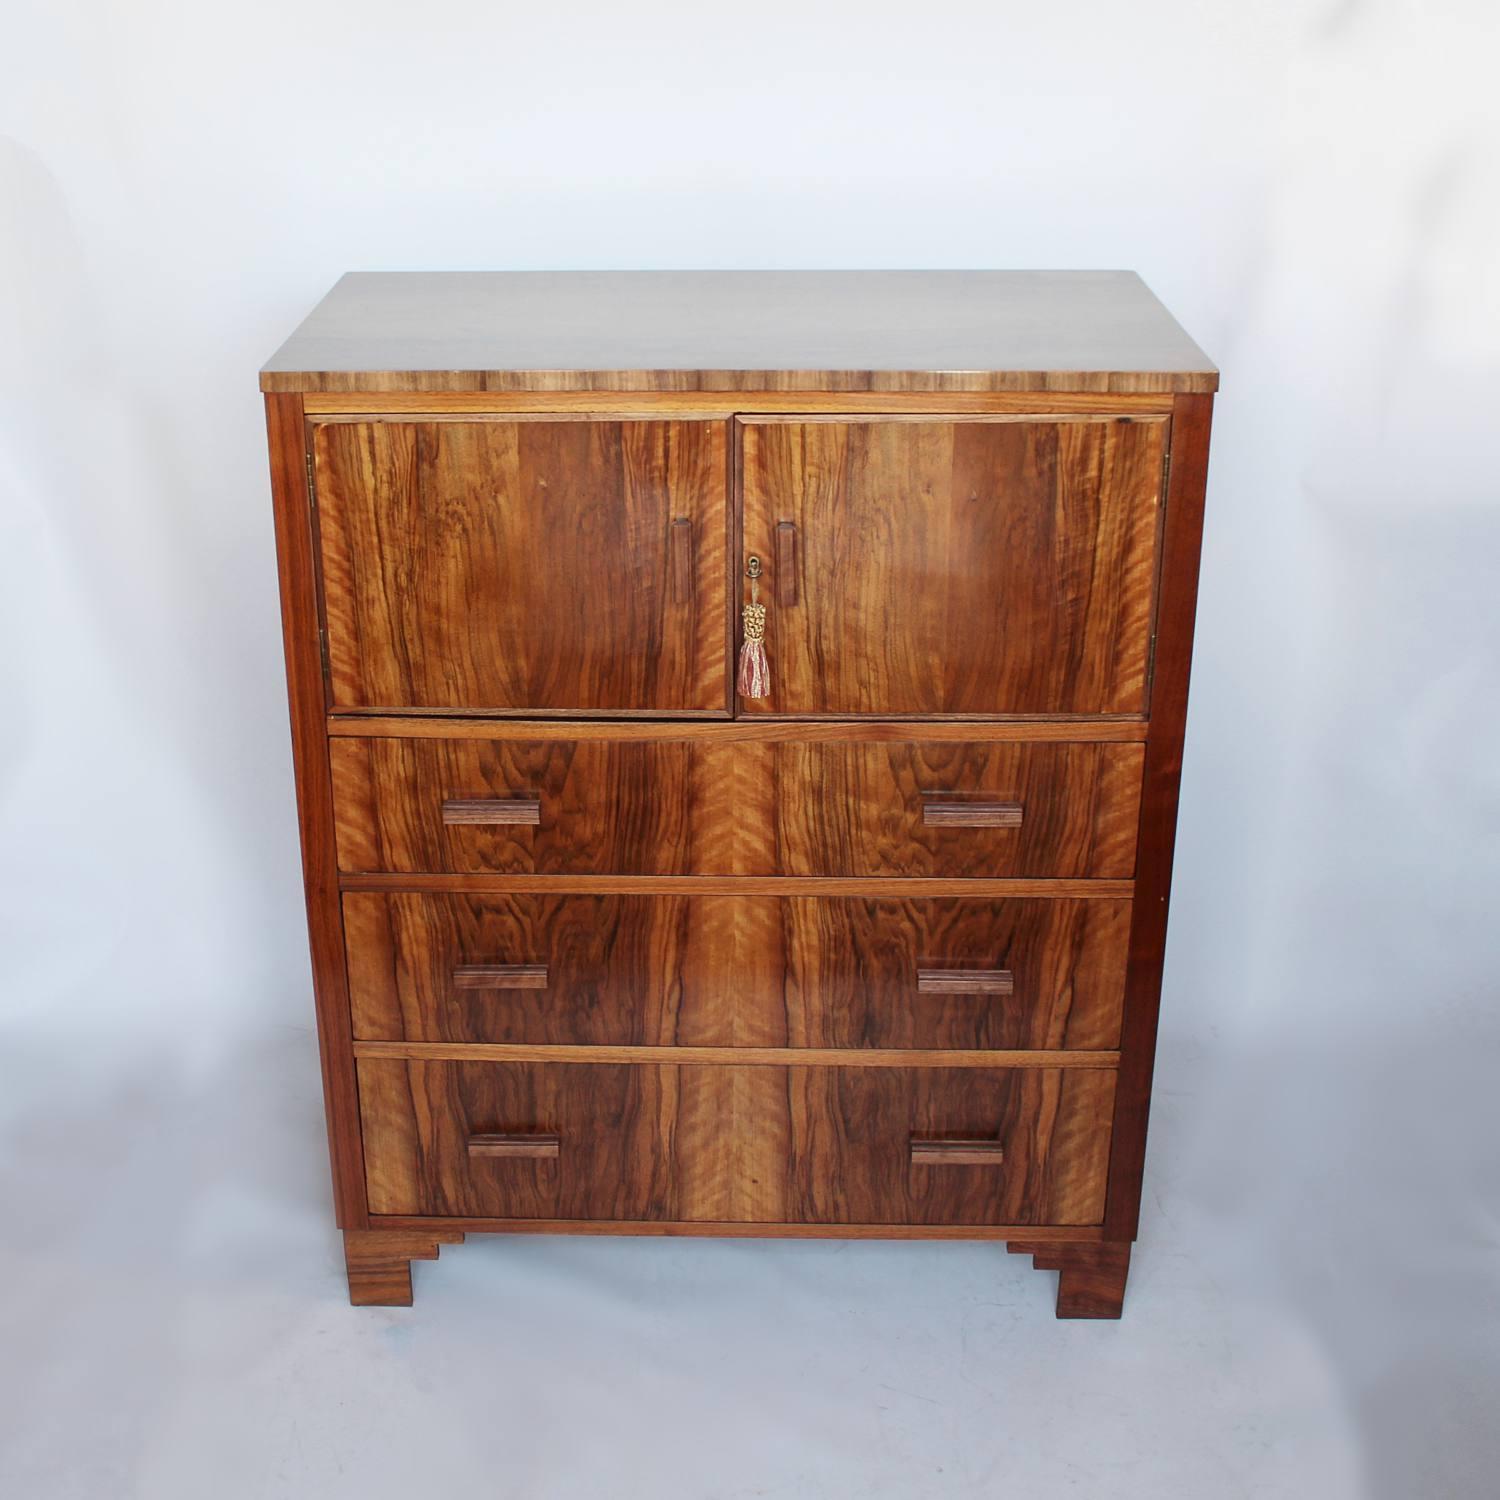 An Art Deco cabinet chest. Three lower drawers with two-door cabinet to top. Walnut throughout with original wooden handles.

 